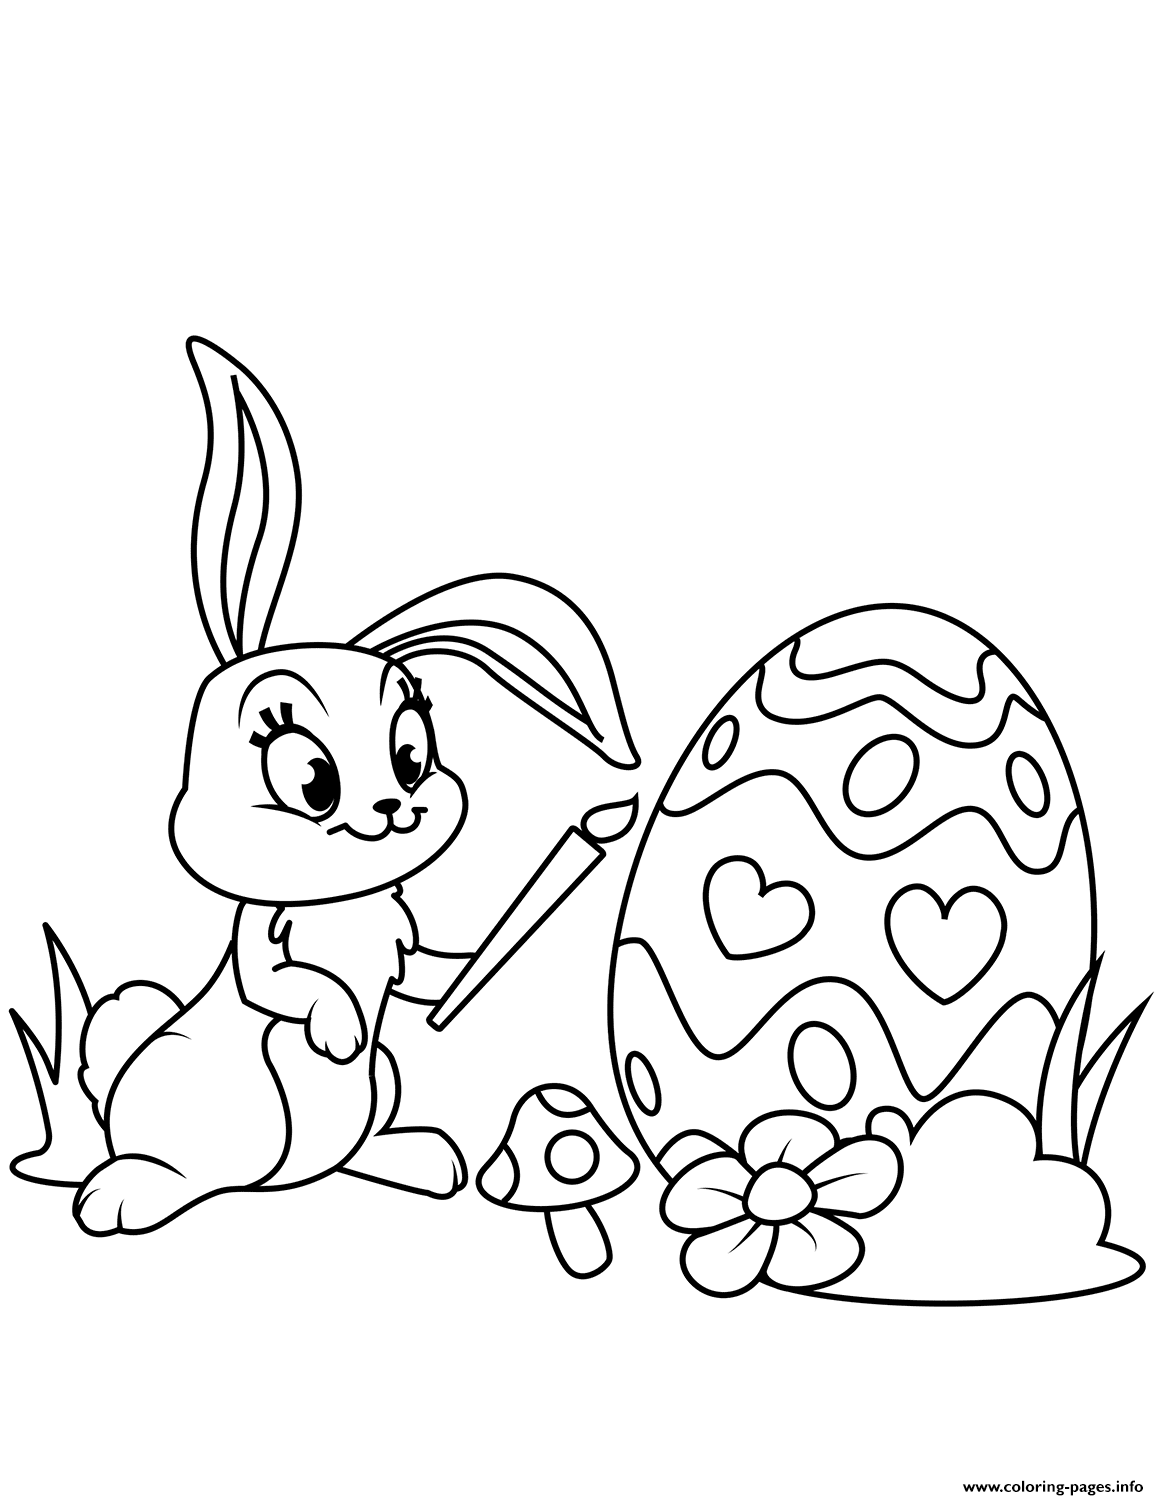 Cute Easter Bunny Painting Egg coloring